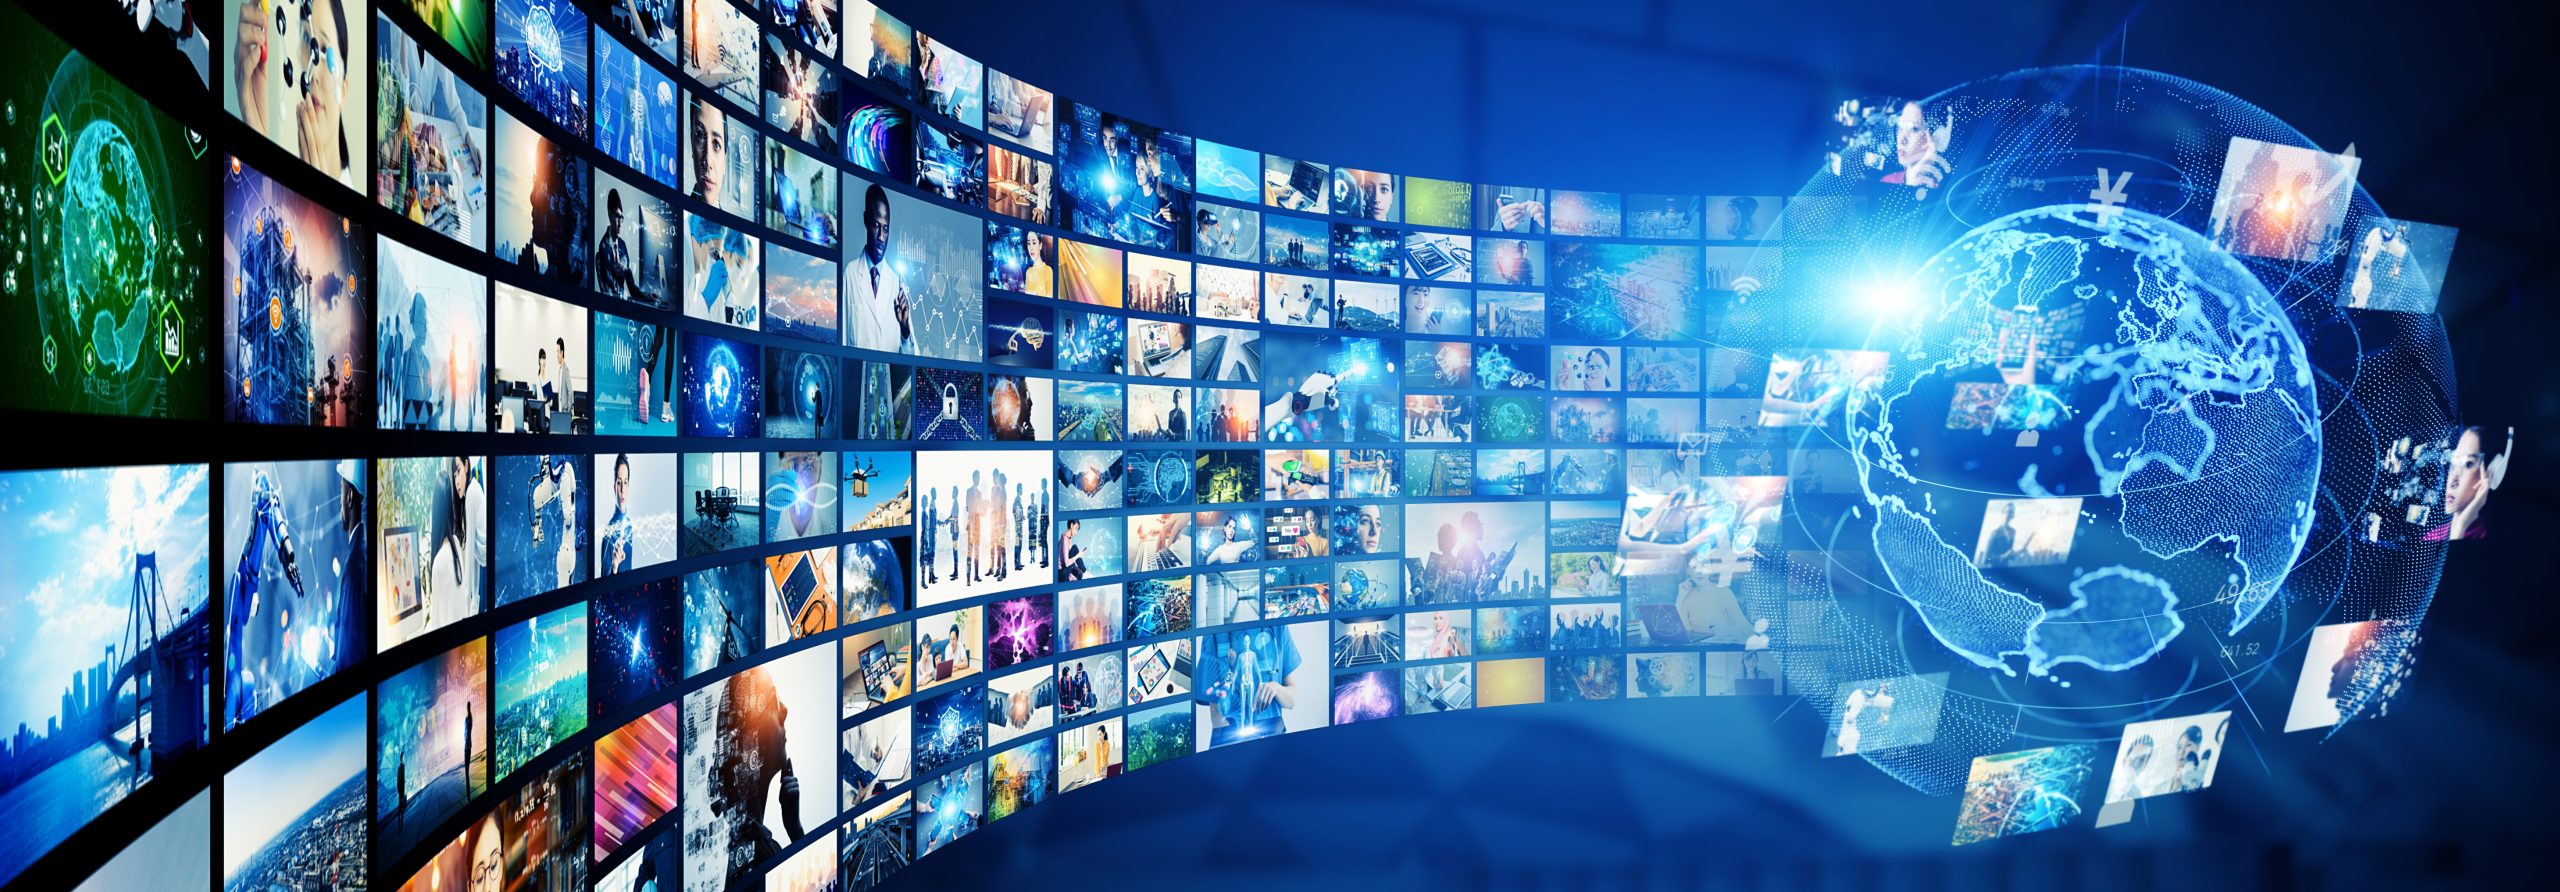 IP-Video Addresses Video Challenges Across Complex and Constantly Evolving ISR Workflows